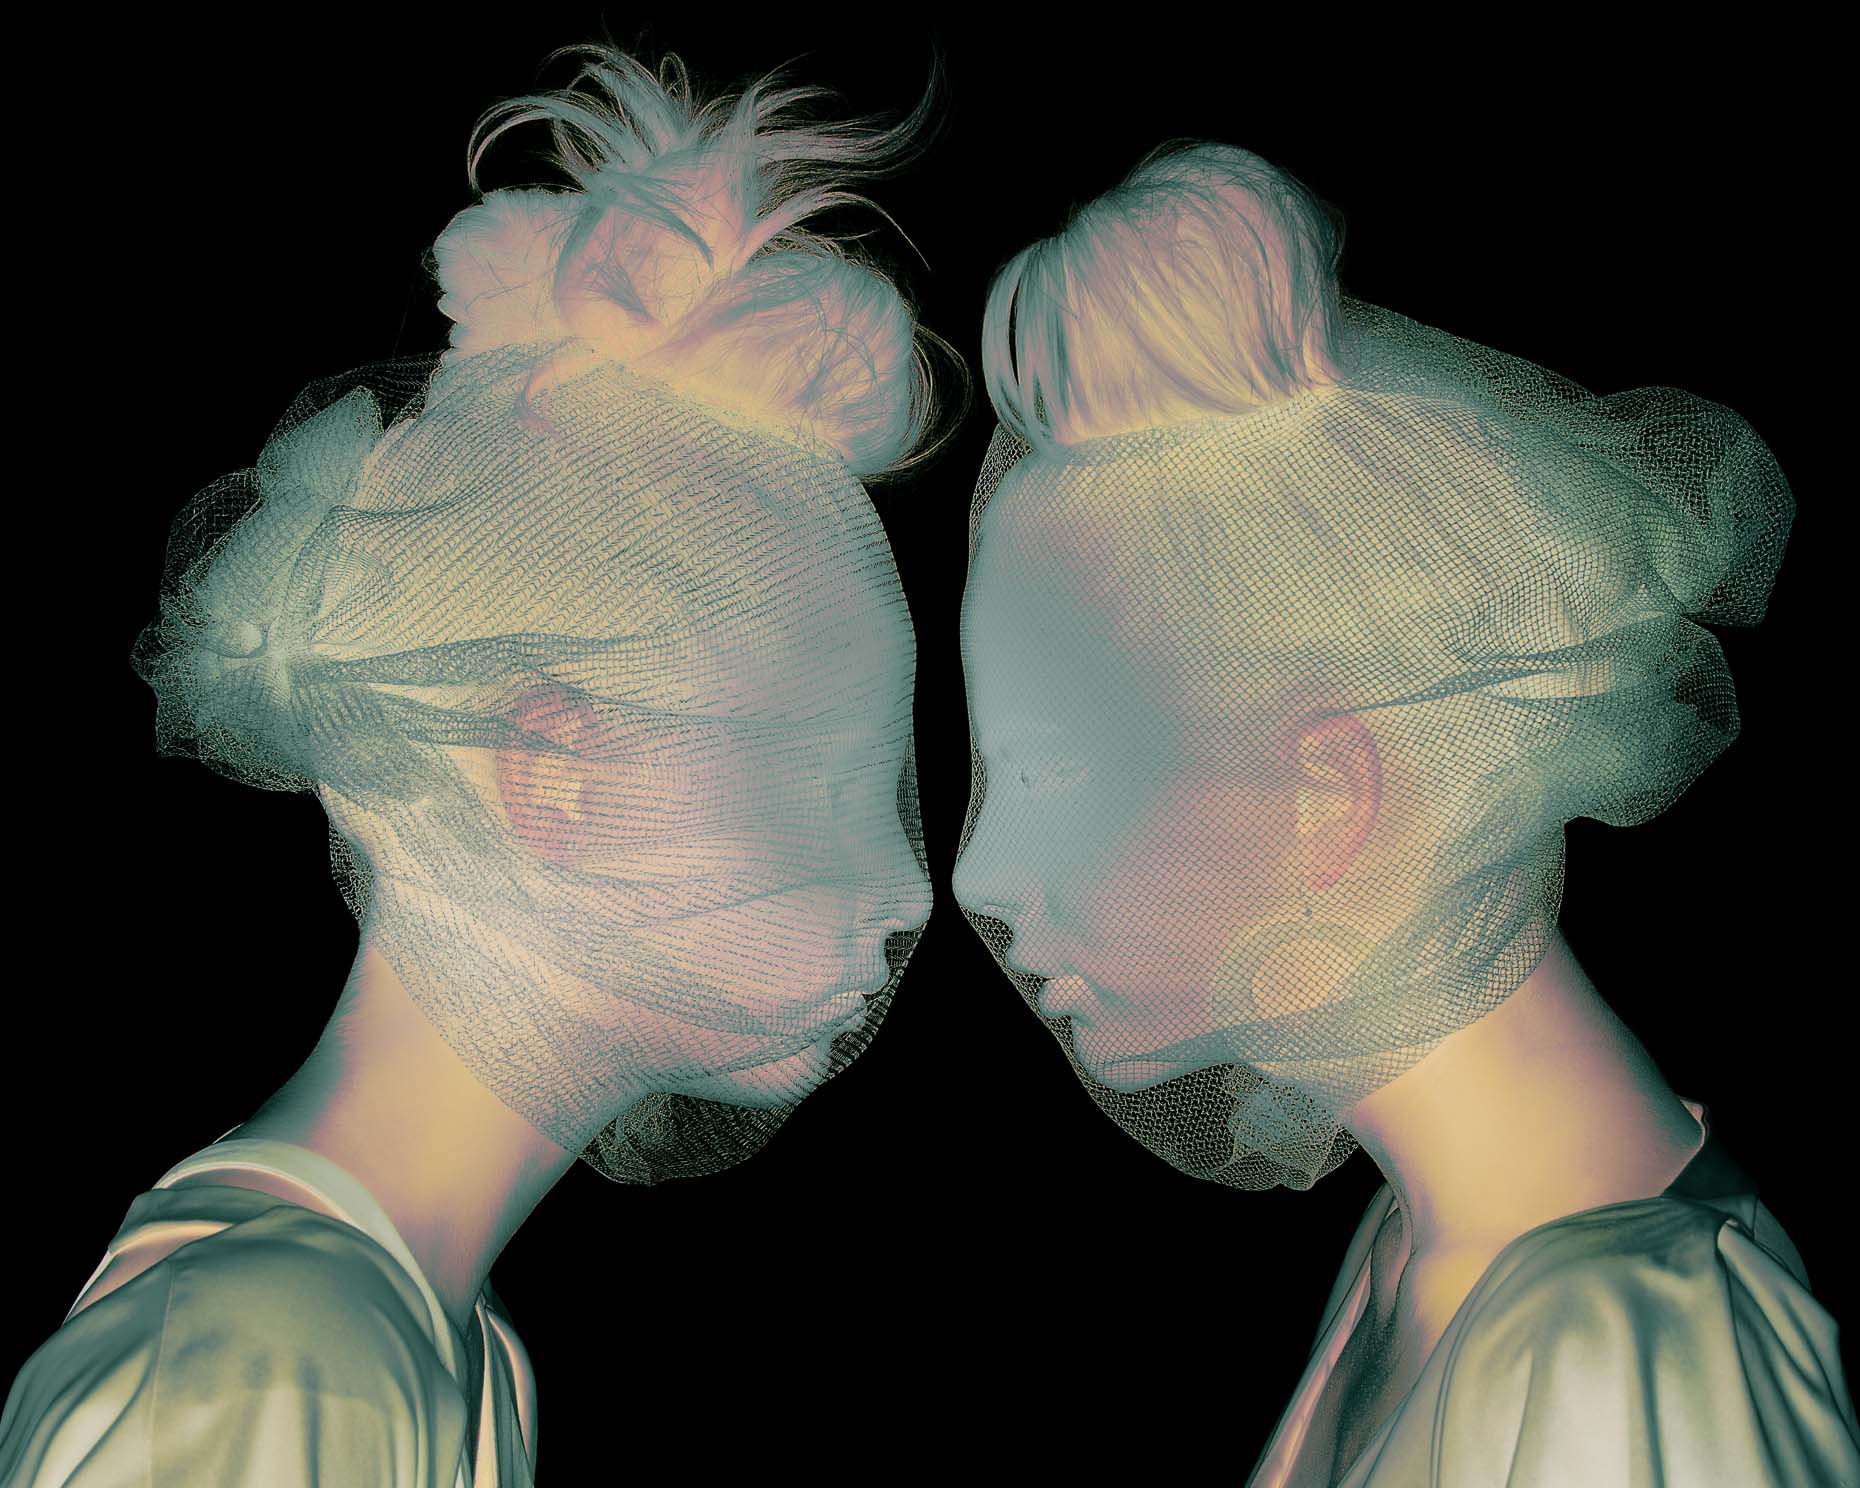 Solarized photo of two women looking directly at each other photographed by Marc Rogoff